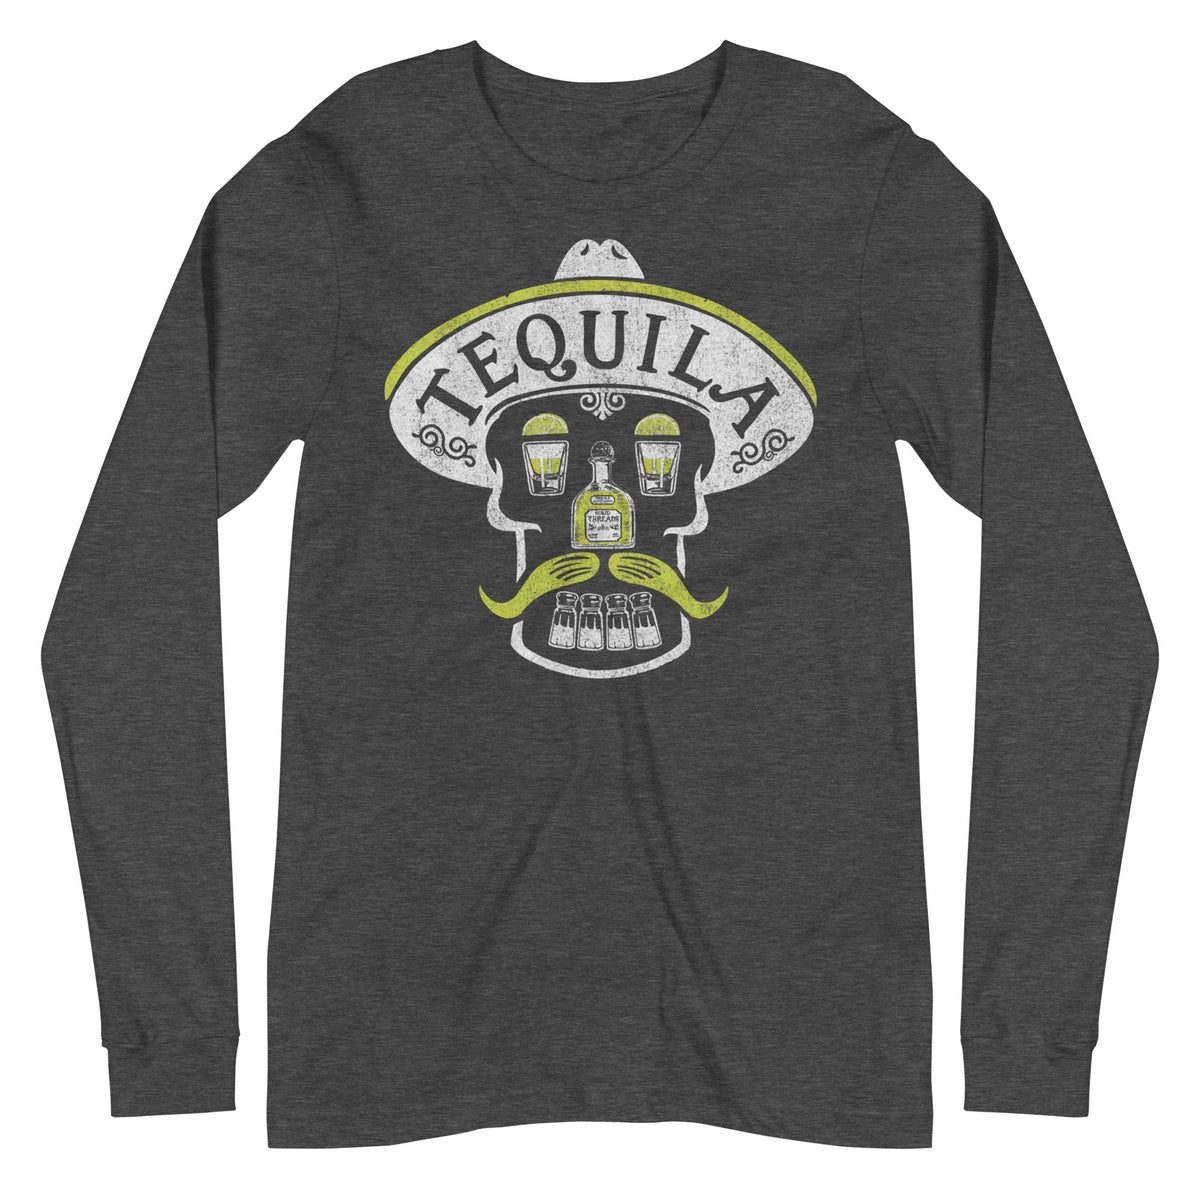 Tequila Skull Vintage Graphic Long Sleeve Tee | Retro Drinking T-Shirt | Solid Threads